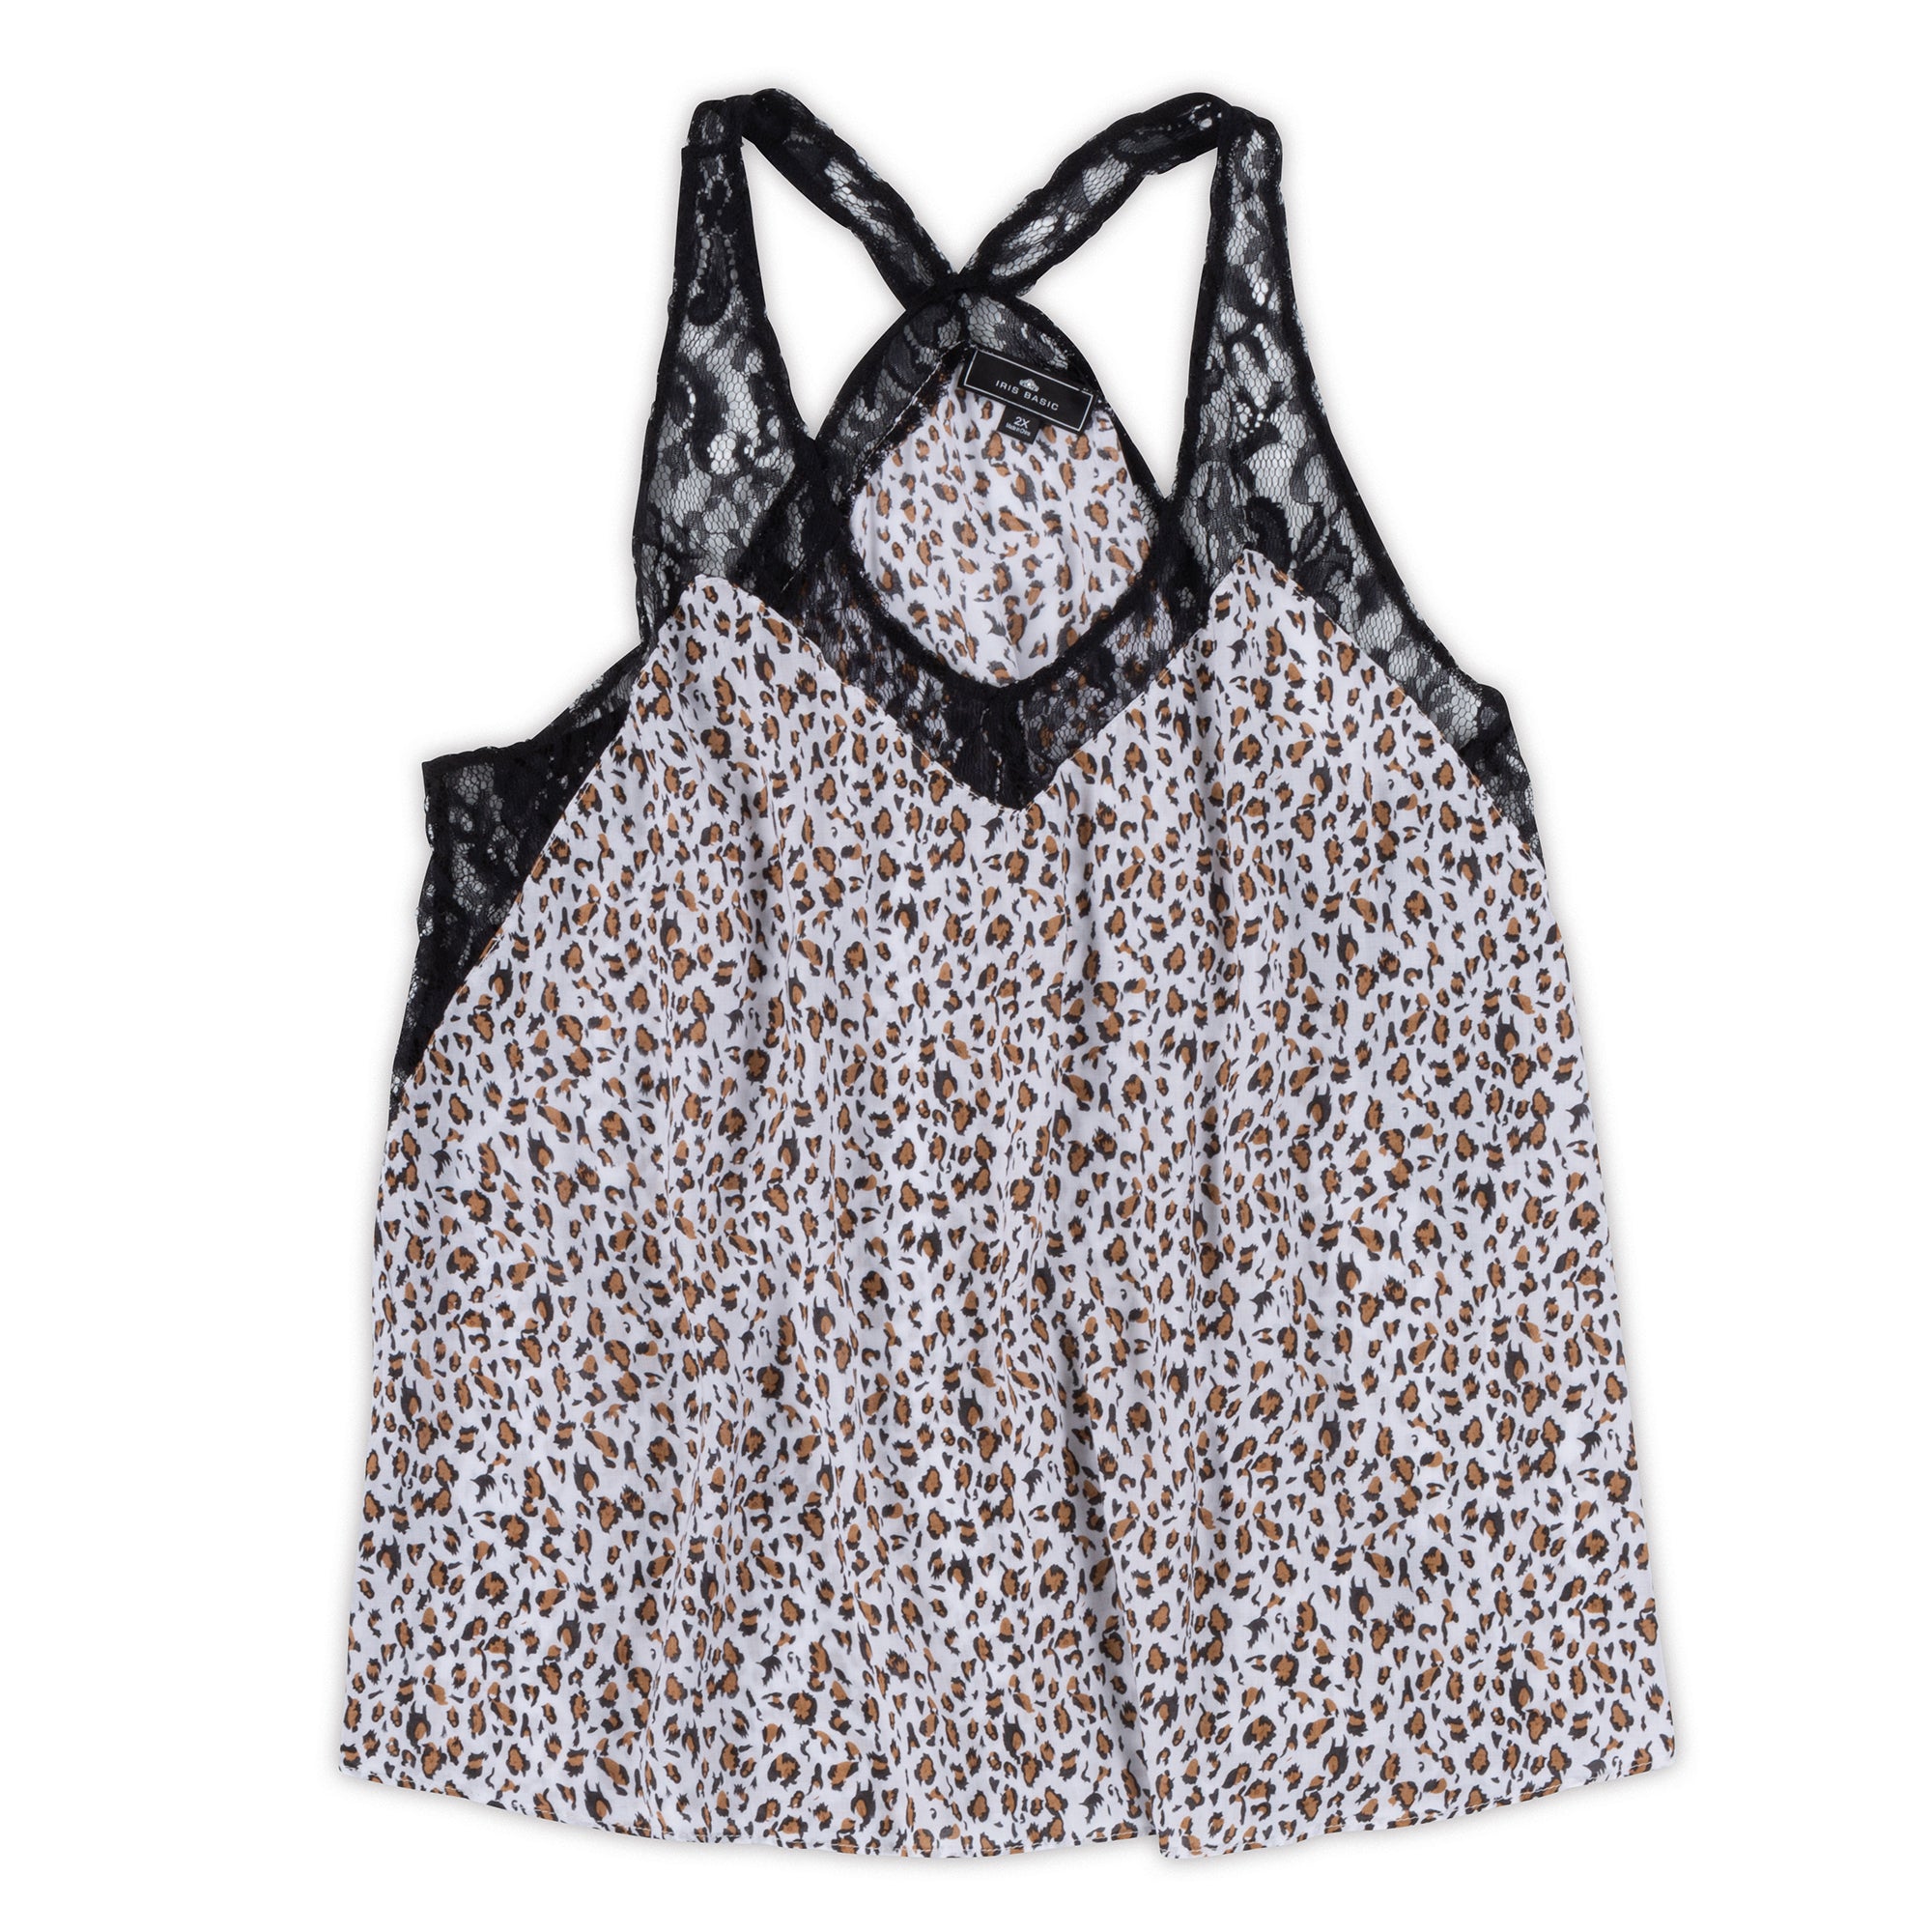 Women's Sleeveless Animal Print Top - 2 Colors/3 PLUS Sizes - 12pcs/pack ($7.90/pc) OR 6pcs/pack ($9.90/pc)- SALE! - CHOOSE PACK SIZE TO SEE LOWER PRICES